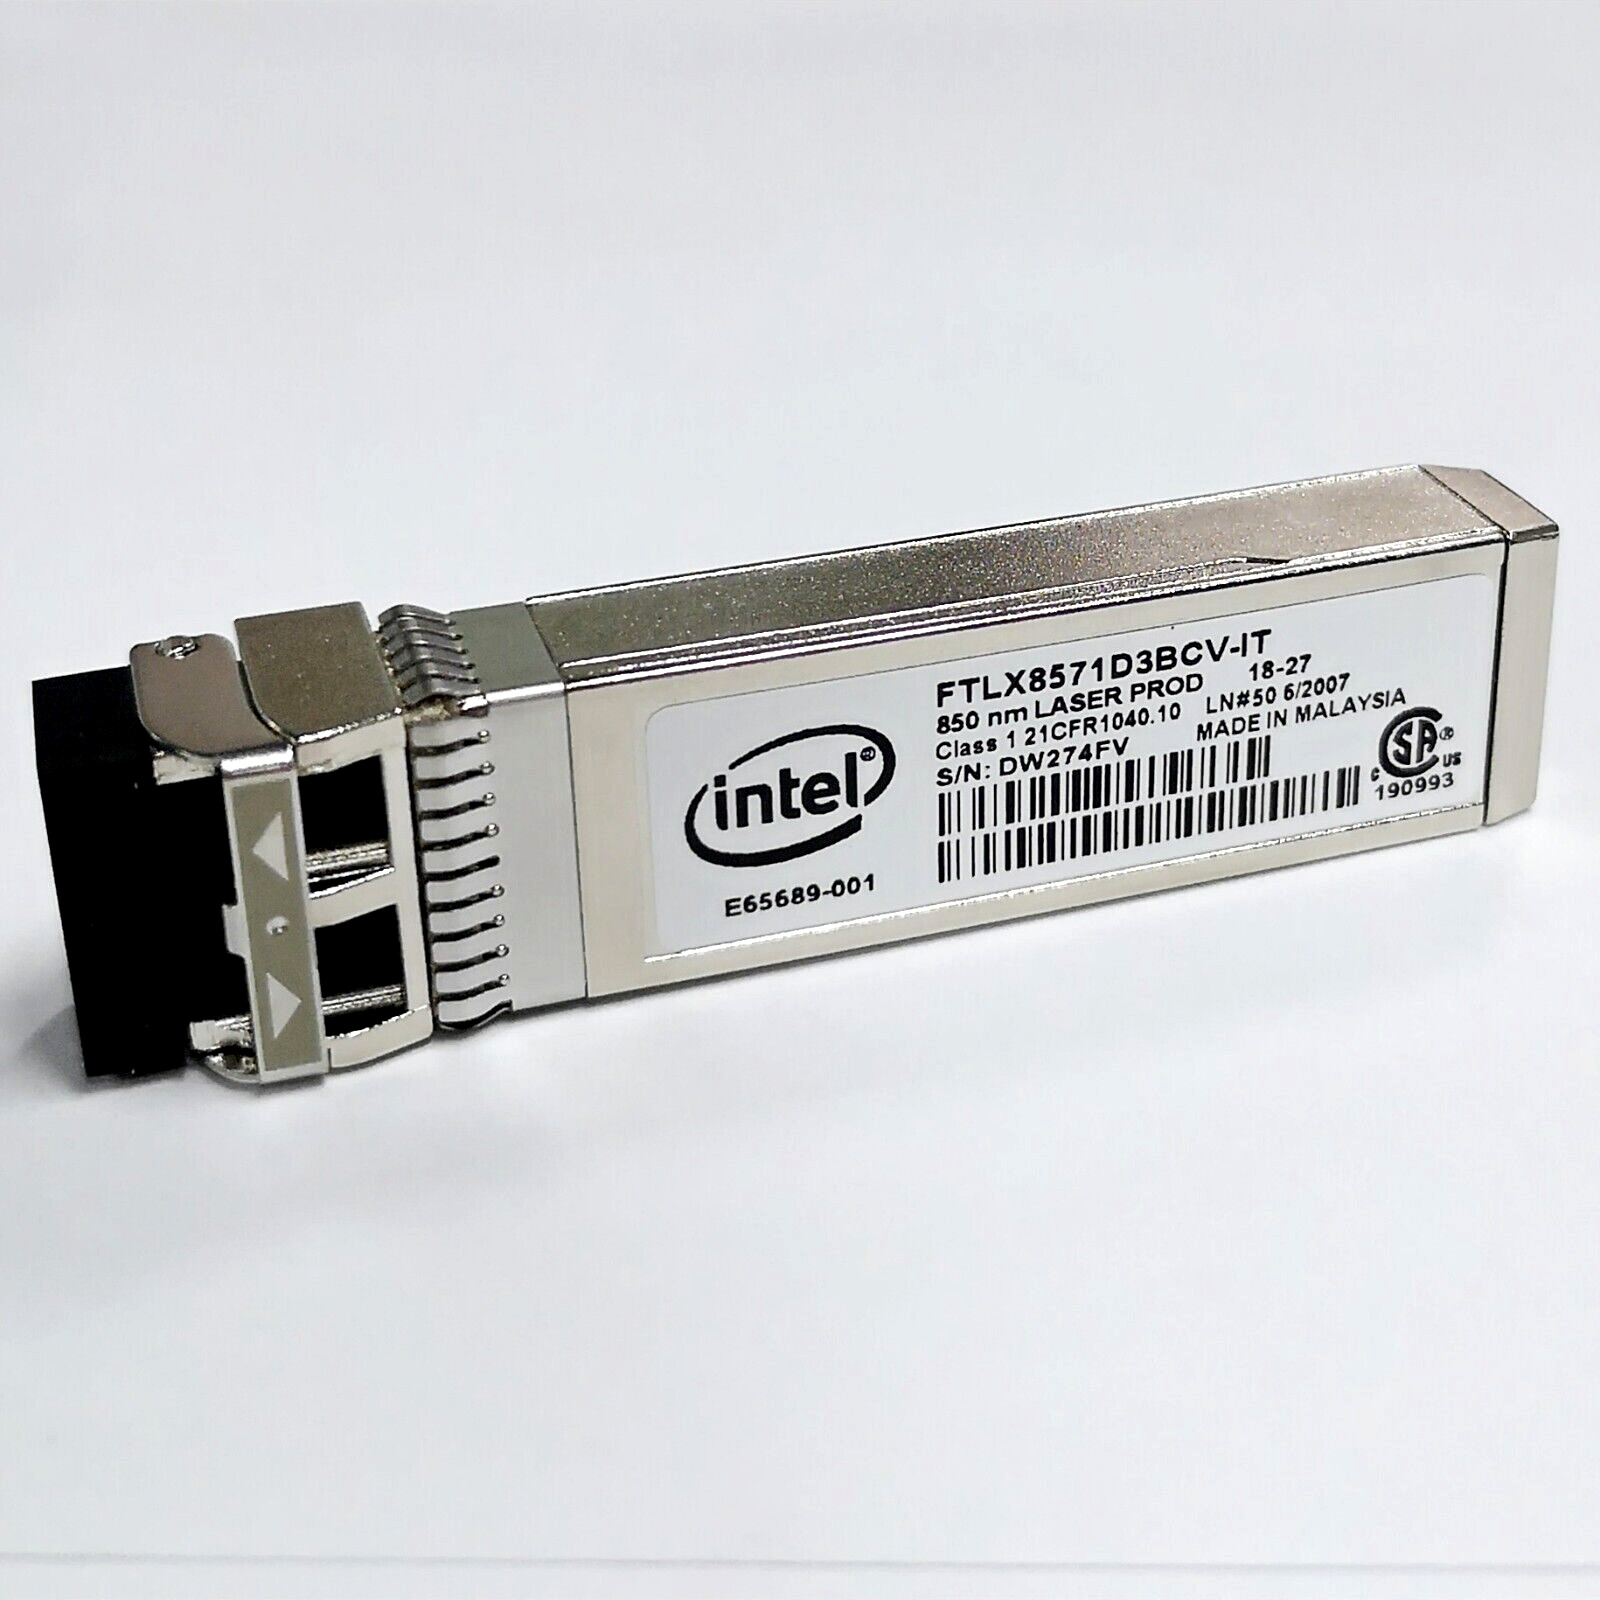 INTEL E10GSFPSR FTLX8571D3BCV-IT SFP+SR 10G/1G E65689-001 0Y3KJN for X710 X520